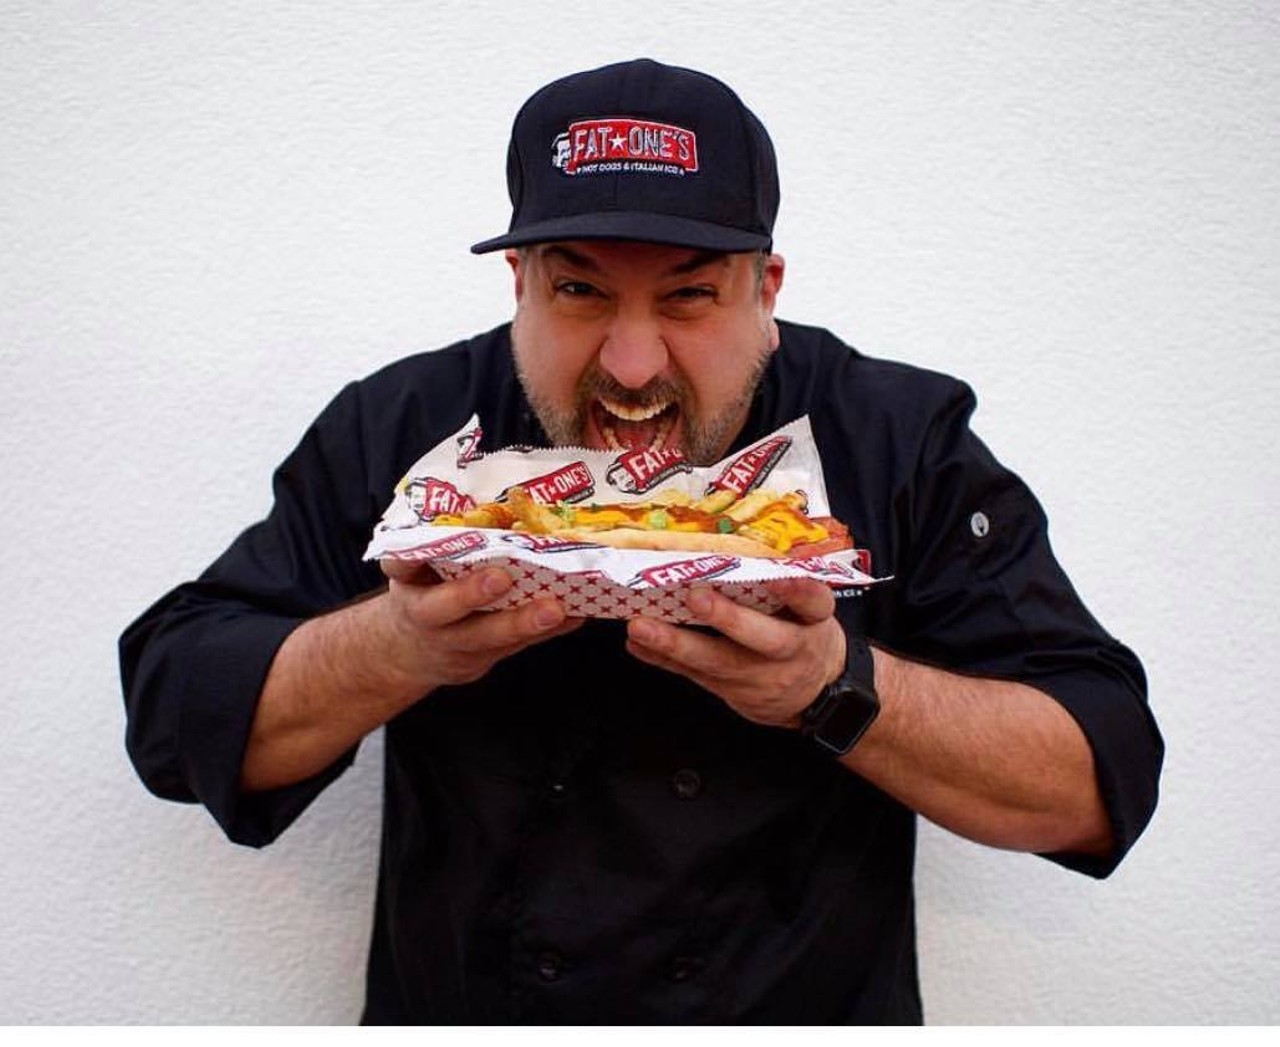 Fat Ones  
Varies |  1-844-4FATONE
It&#146;s rare that Guy Fieri goes to a place with a star chef. And Orlando&#146;s own Fat Ones has a star chef in the truck (of a sort). The hotdog stand is the brainchild of Joey Fatone of N*Sync.
Photo via Fat Ones/Facebook